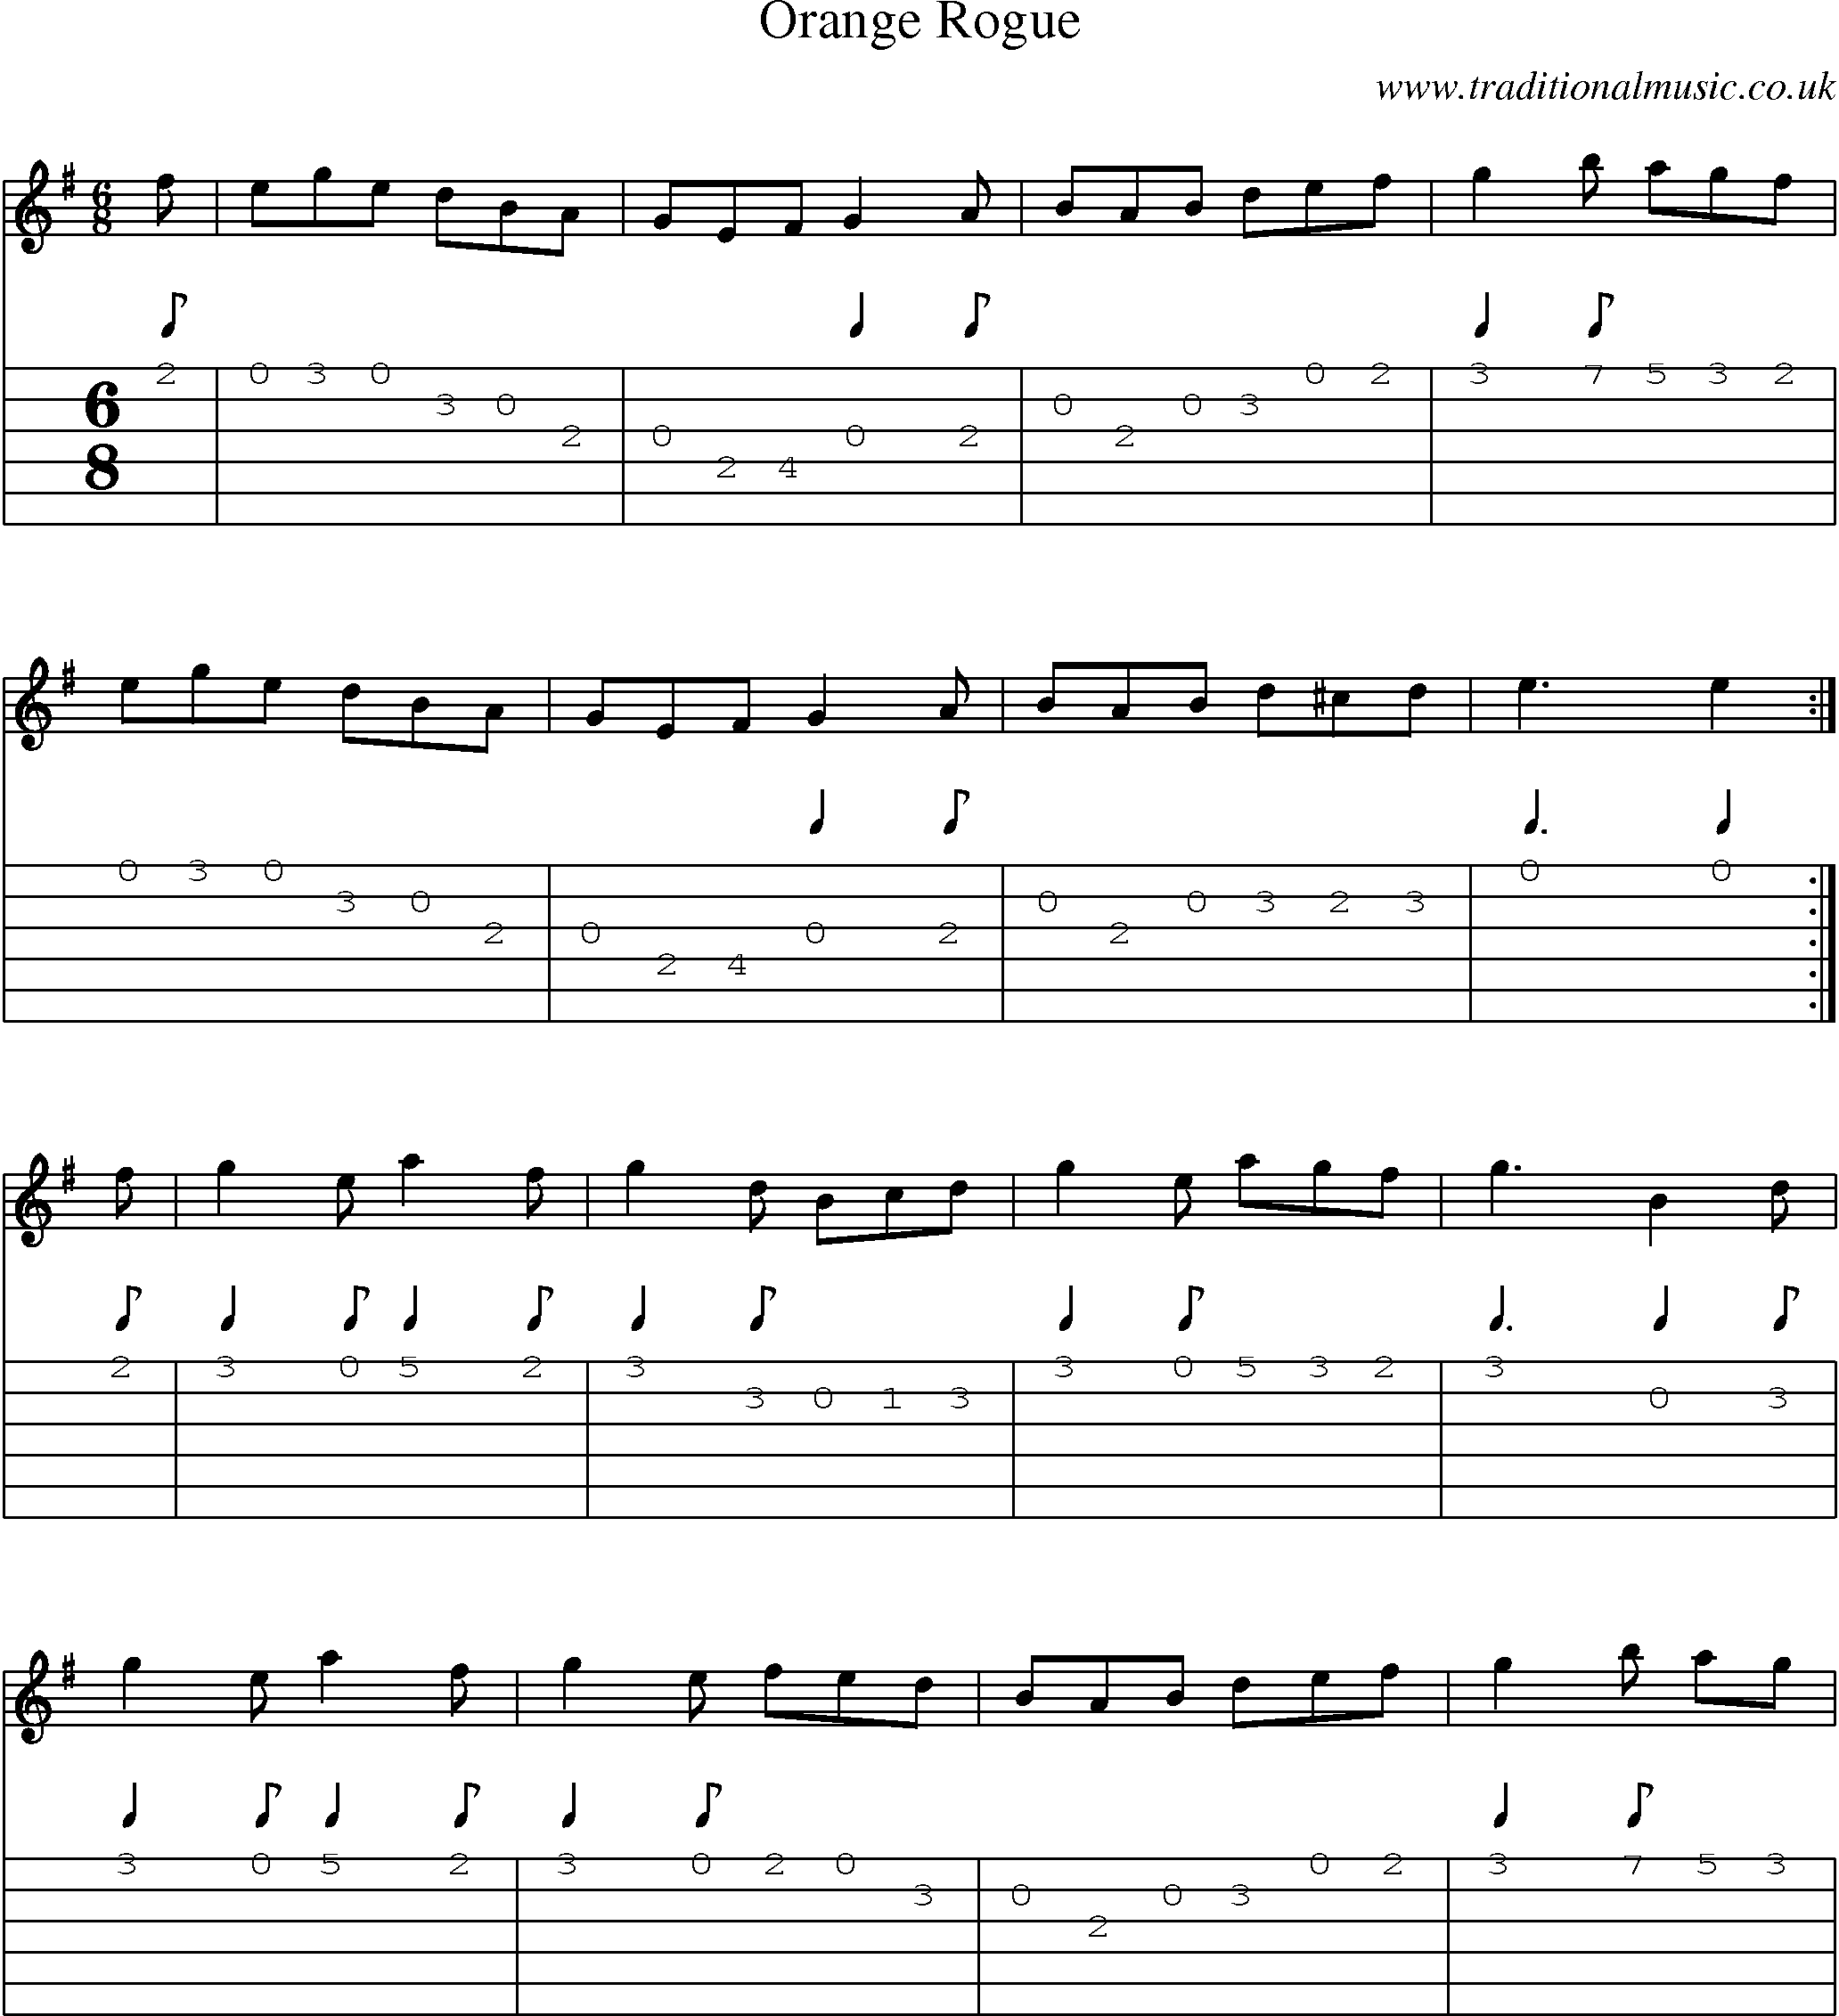 Music Score and Guitar Tabs for Orange Rogue